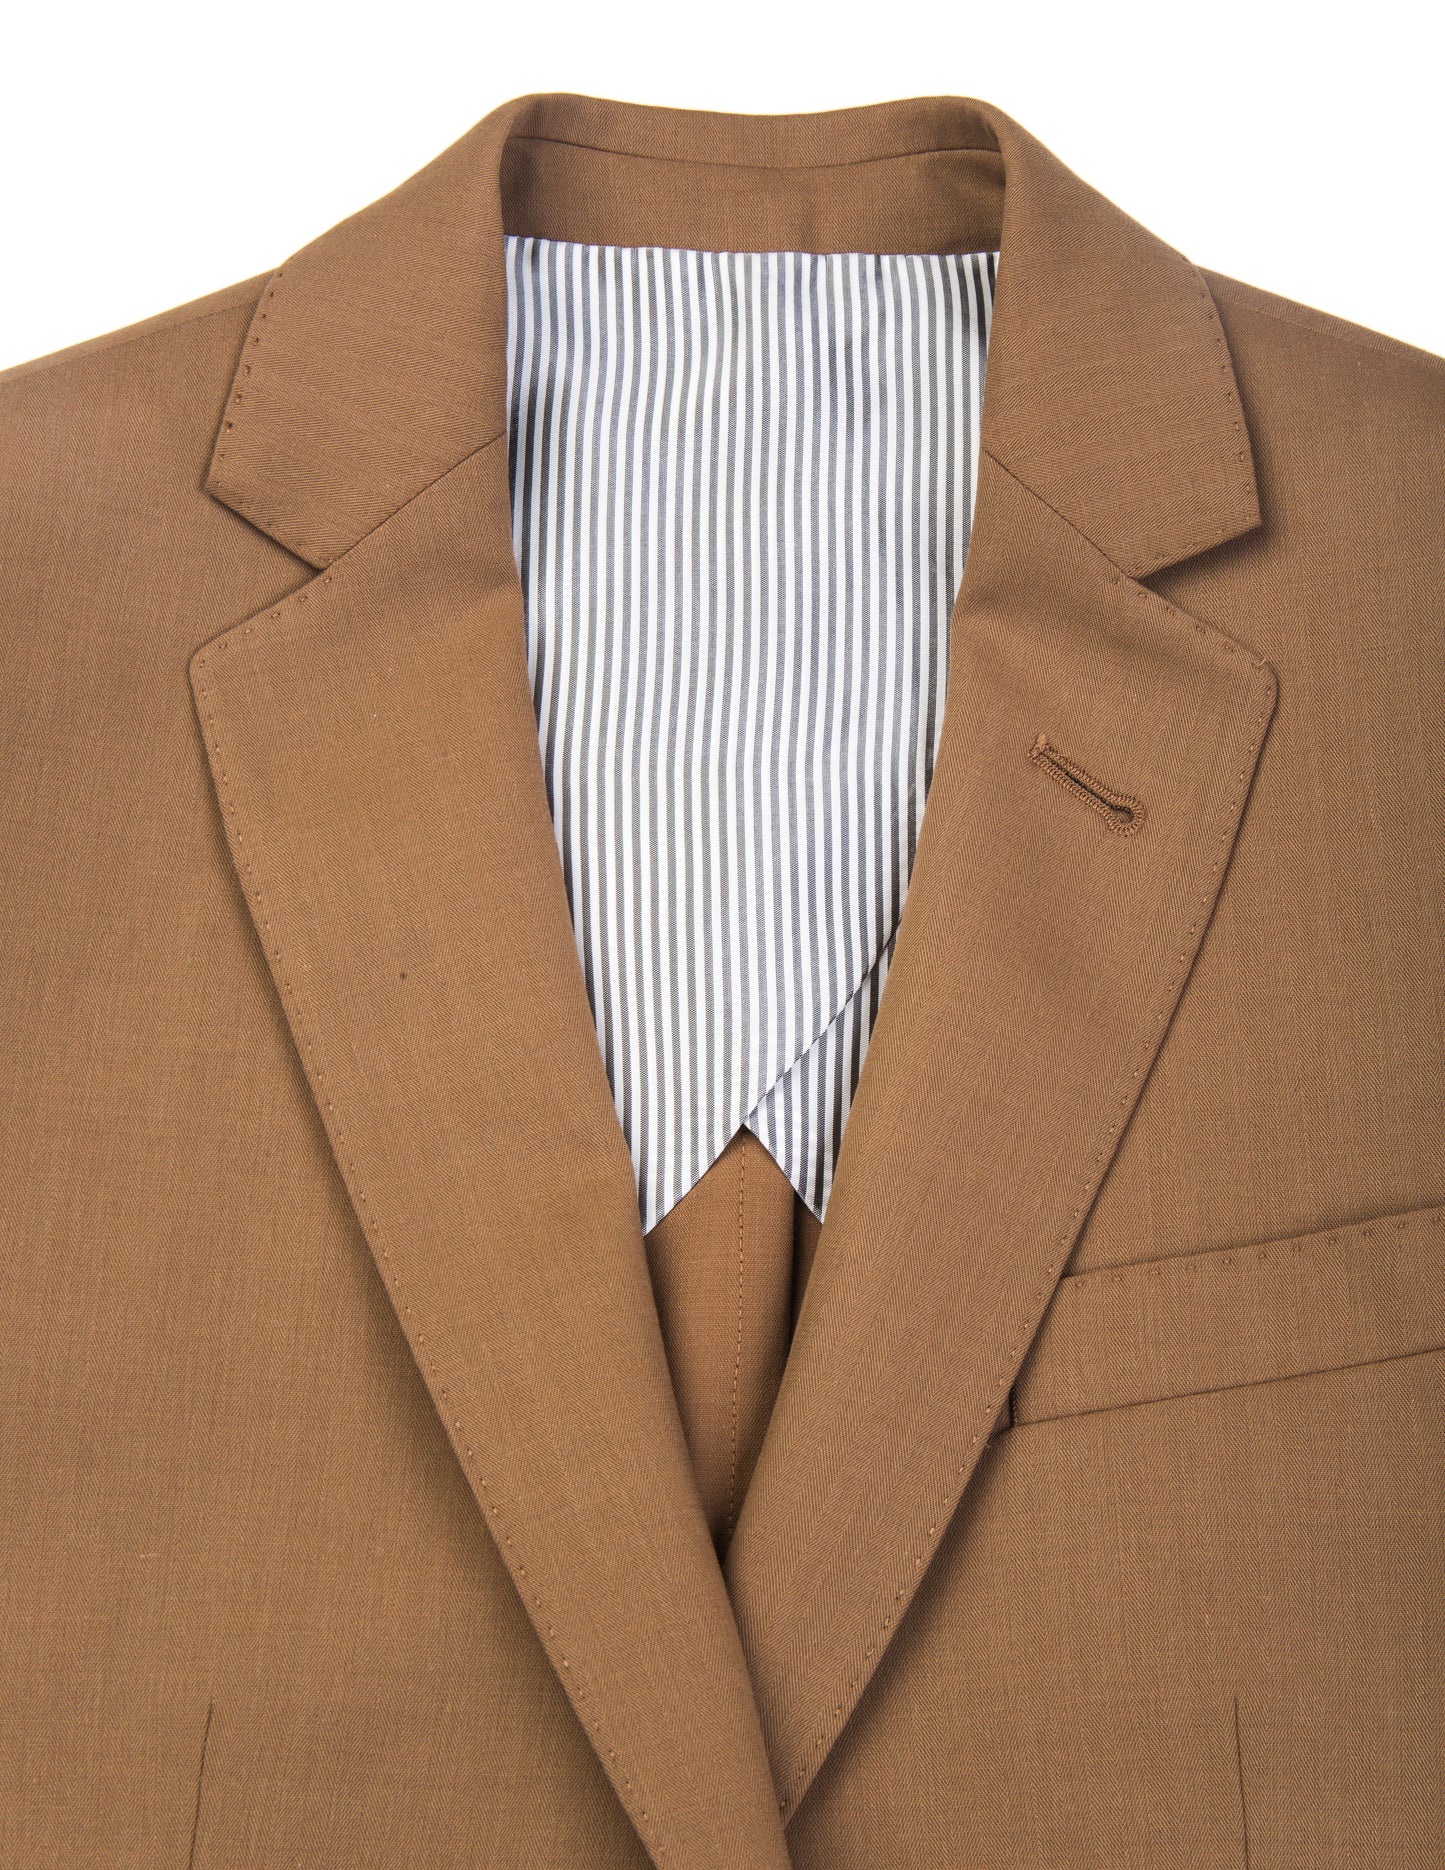 Detail of BKT50 Tailored Blazer in Herringbone Wool/Cotton - Tobacco showing lapel and half-lining